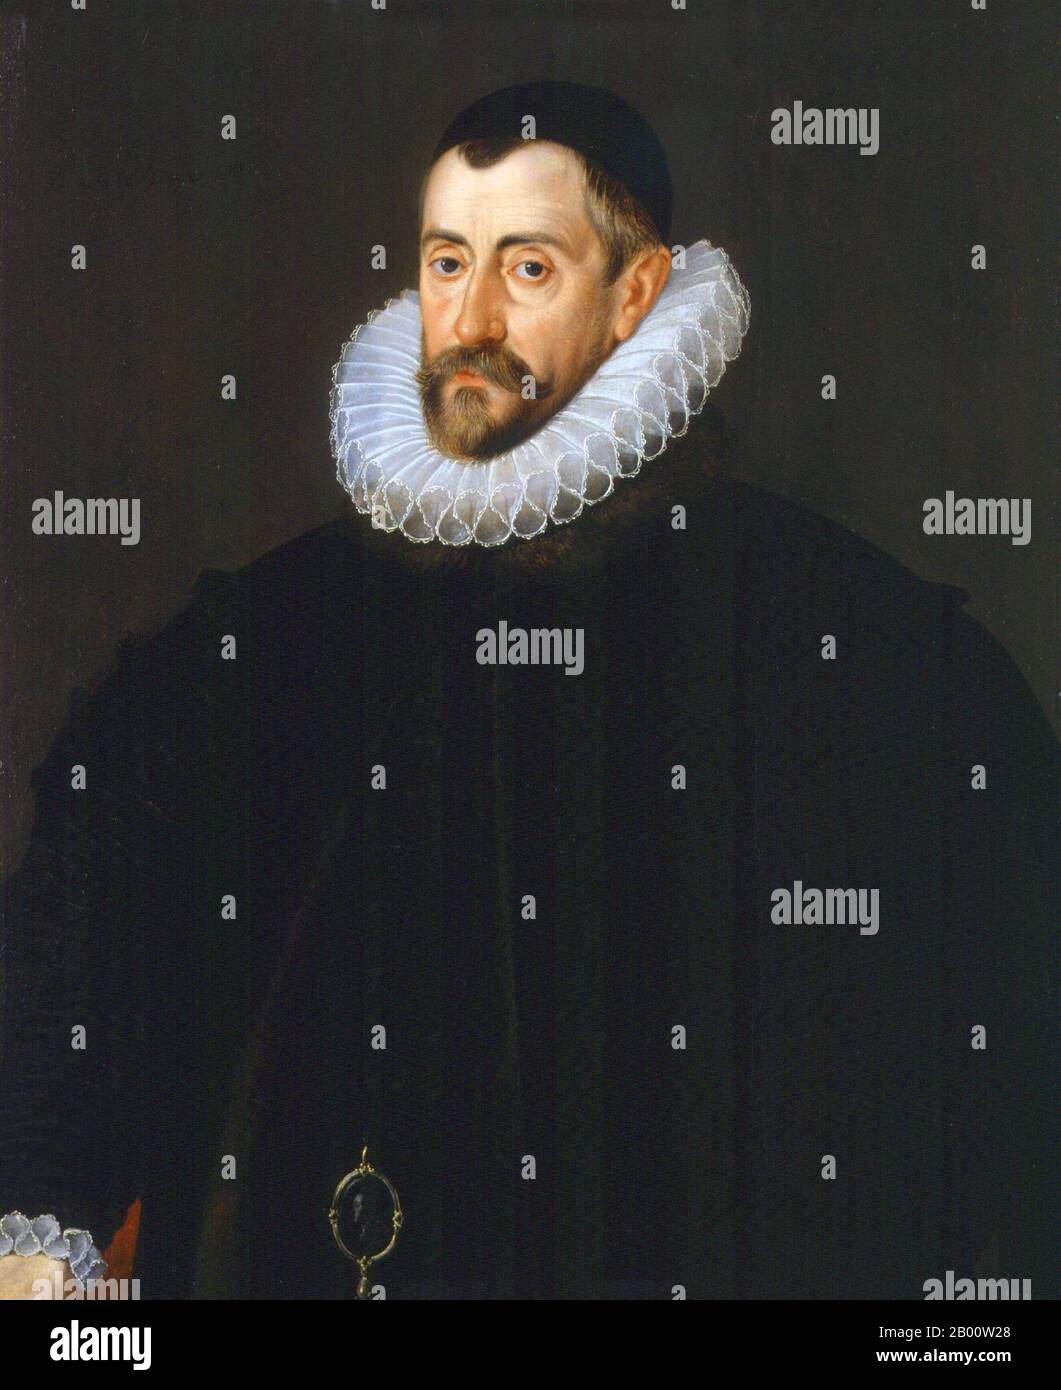 England: Sir Francis Walsingham (1532 – 1590), Principal Secretary of England (1573-1590). Oil on panel painting by John De Critz the Elder (1551-1642), c. 1585.  Sir Francis Walsingham (c. 1532 – 6 April 1590) was Principal Secretary to Queen Elizabeth I of England from 1573 till 1590, and is popularly remembered as her 'spymaster'. Walsingham is frequently cited as one of the earliest practitioners of modern intelligence methods both for espionage and for domestic security. Walsingham was one of the small coterie who directed the Elizabethan state. Stock Photo